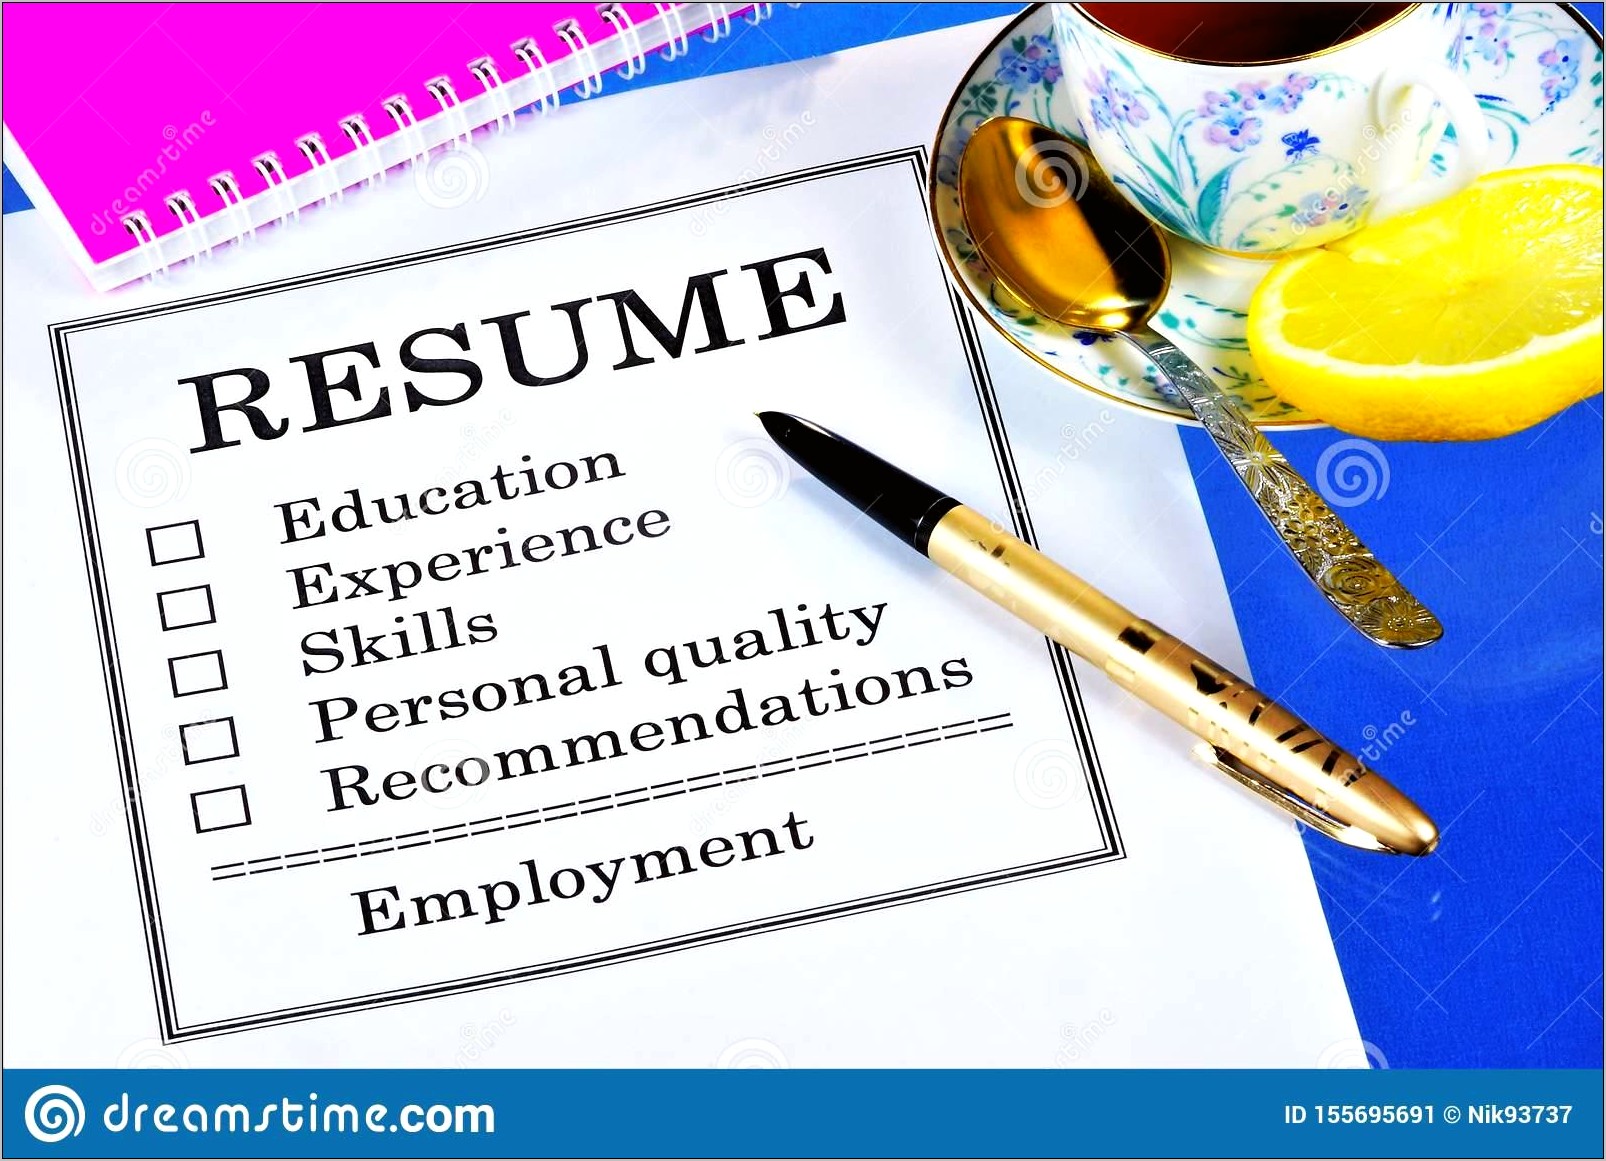 Basic Closing Word Summary For A Resume Images